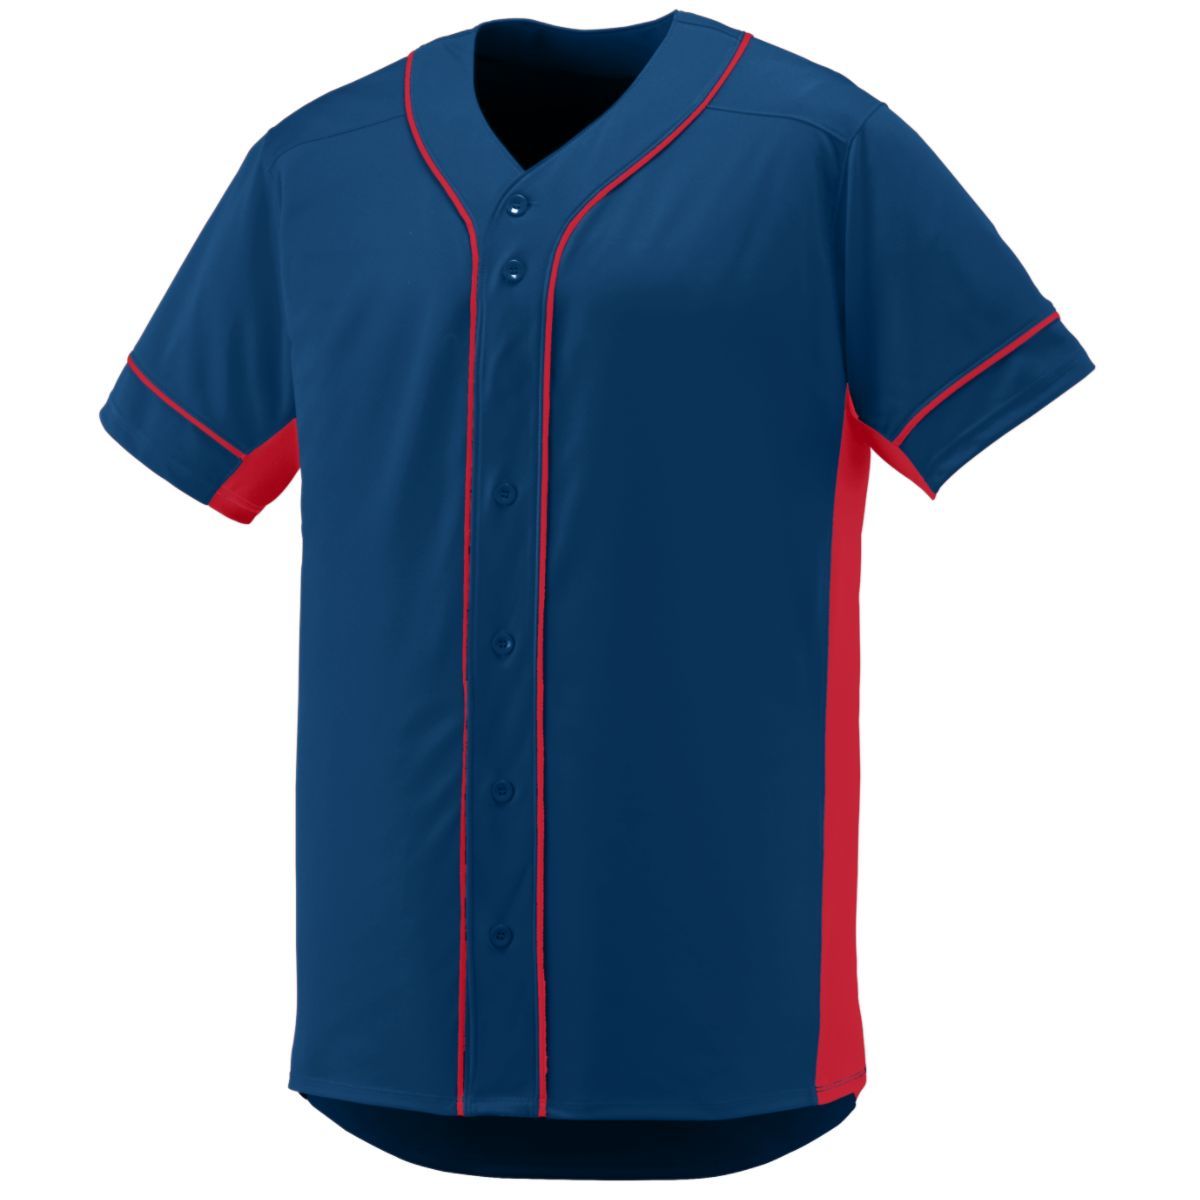 Augusta Sportswear Slugger Jersey in Navy/Red  -Part of the Adult, Adult-Jersey, Augusta-Products, Baseball, Shirts, All-Sports, All-Sports-1 product lines at KanaleyCreations.com